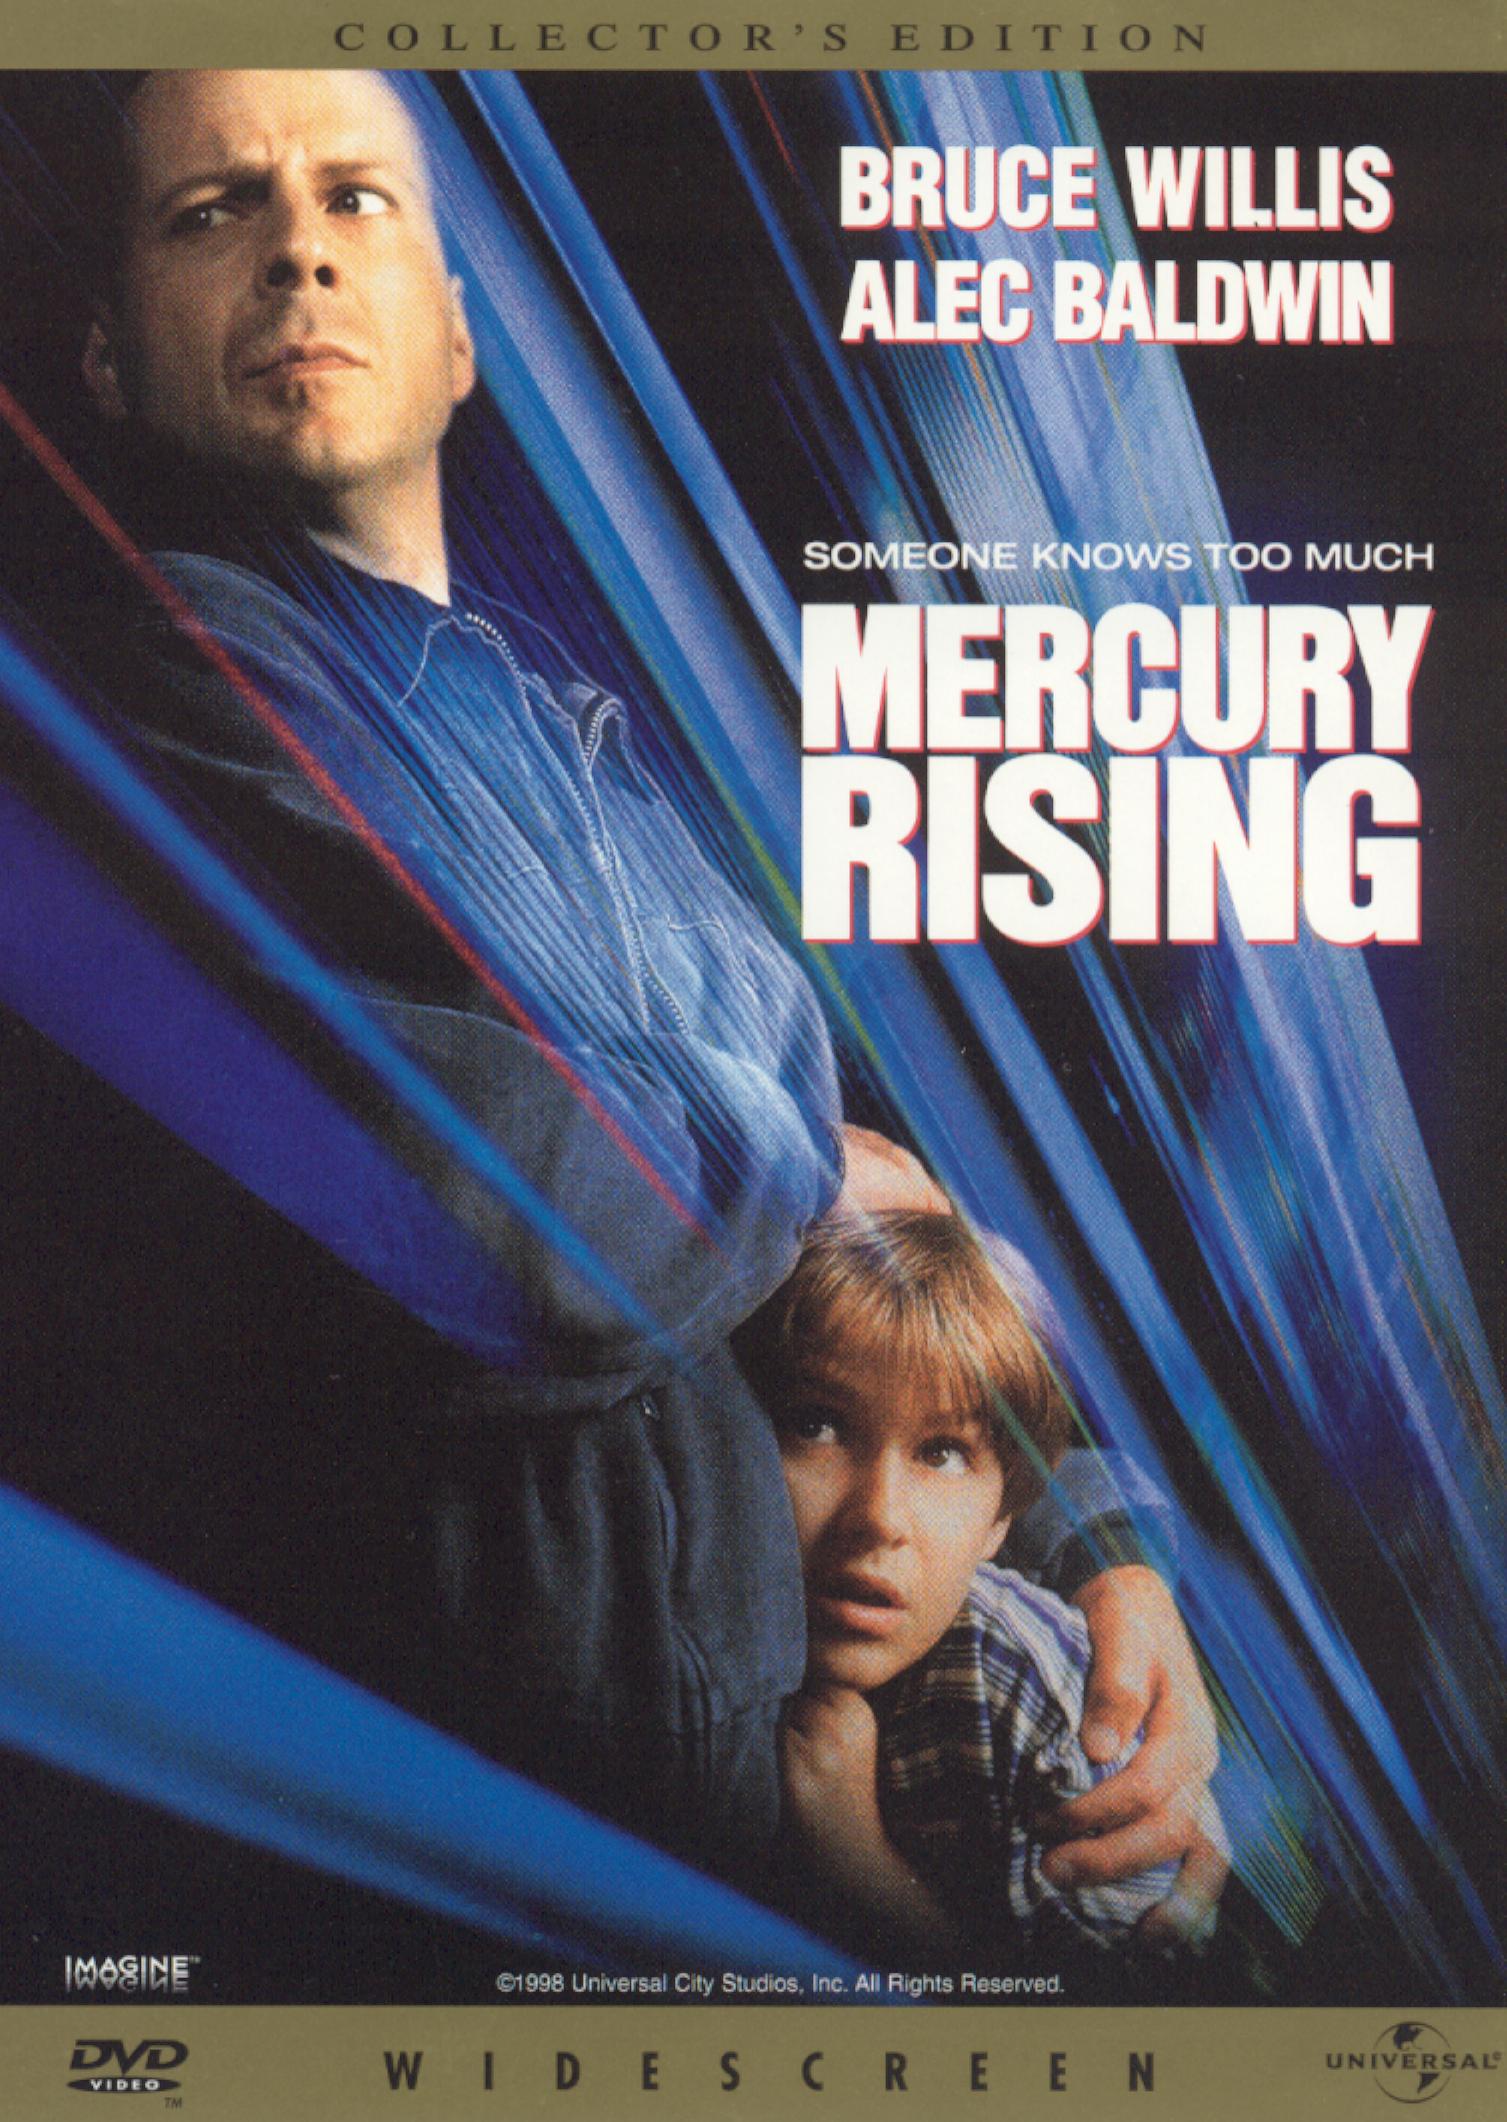 Mercury Rising [Collector's Edition] cover art